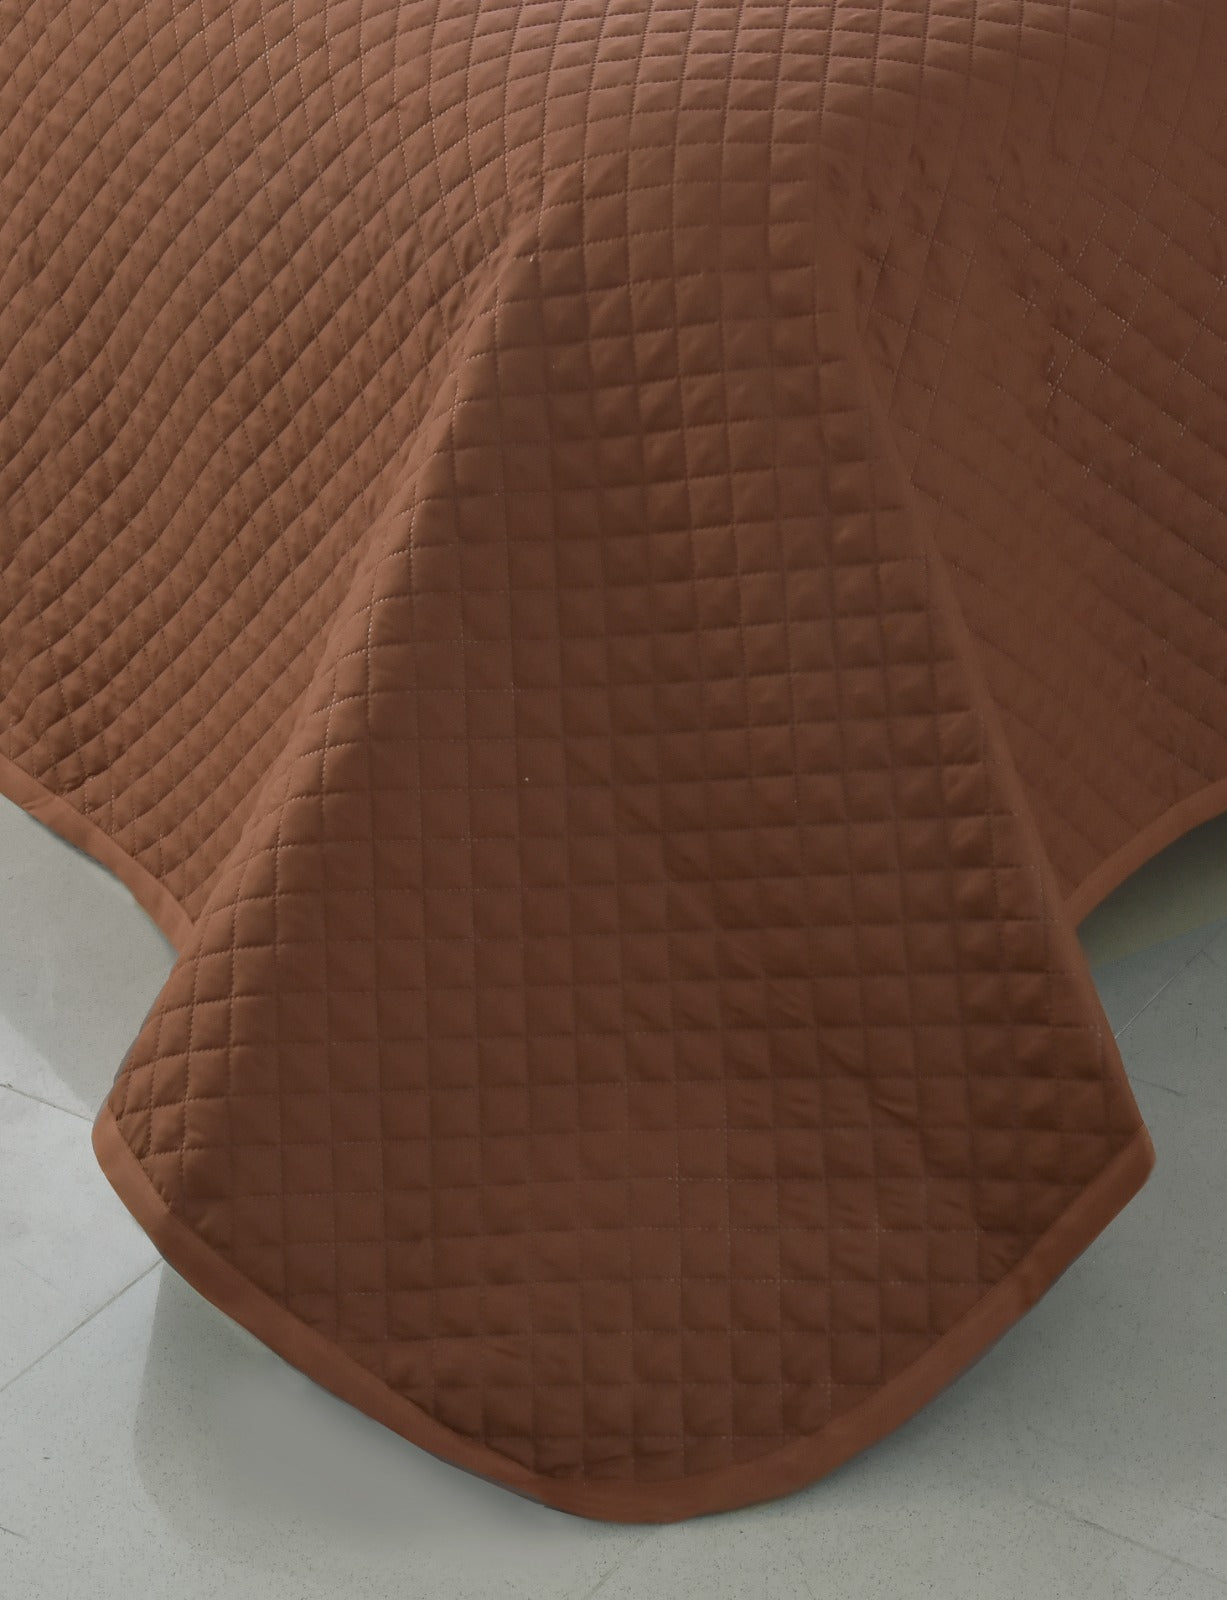 4 PCs Ultrasonic Quilted Luxury Bed Spread Set-Brown Apricot